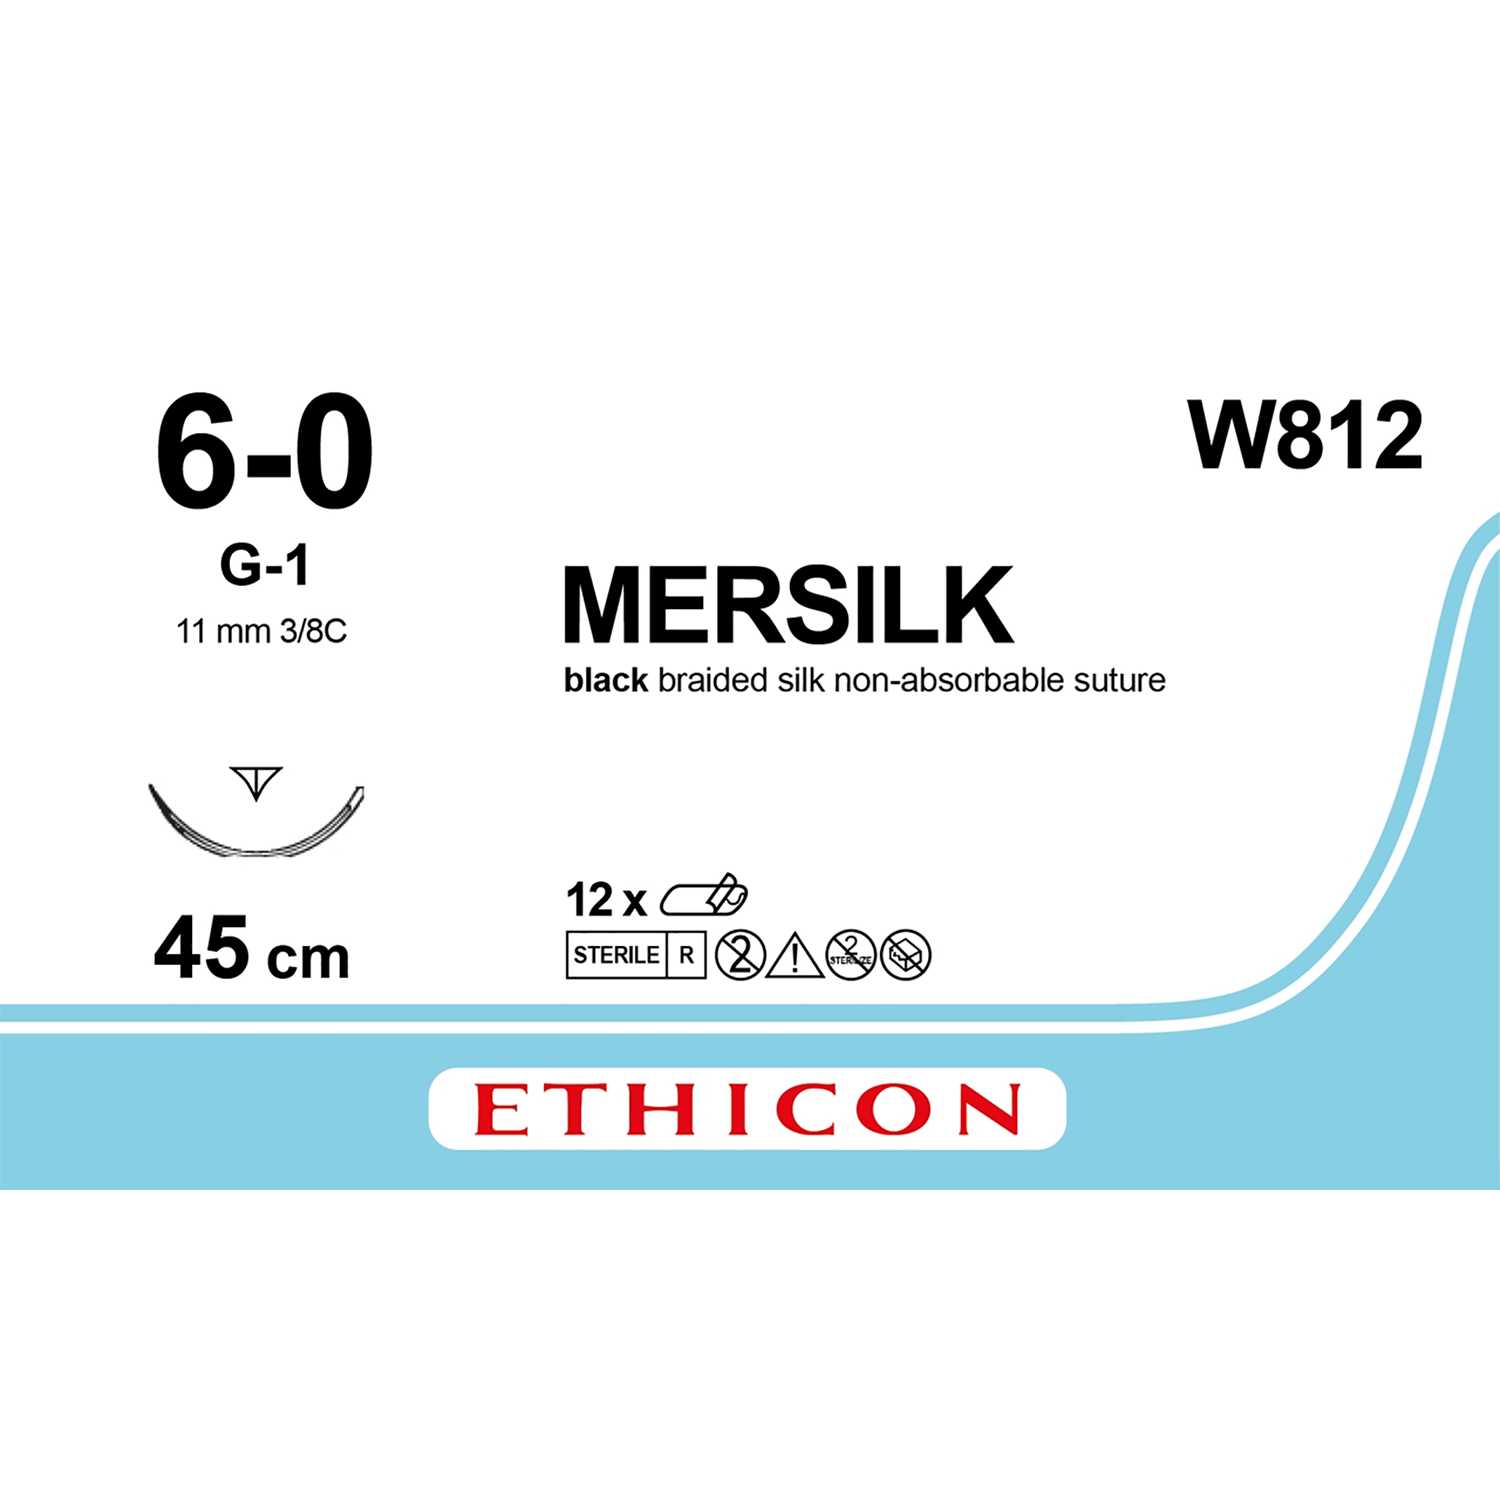 Ethicon Mersilk Suture | Non Absorbable | Black | Size: 6-0 | Length: 45cm | Needle: G-1 | Pack of 12